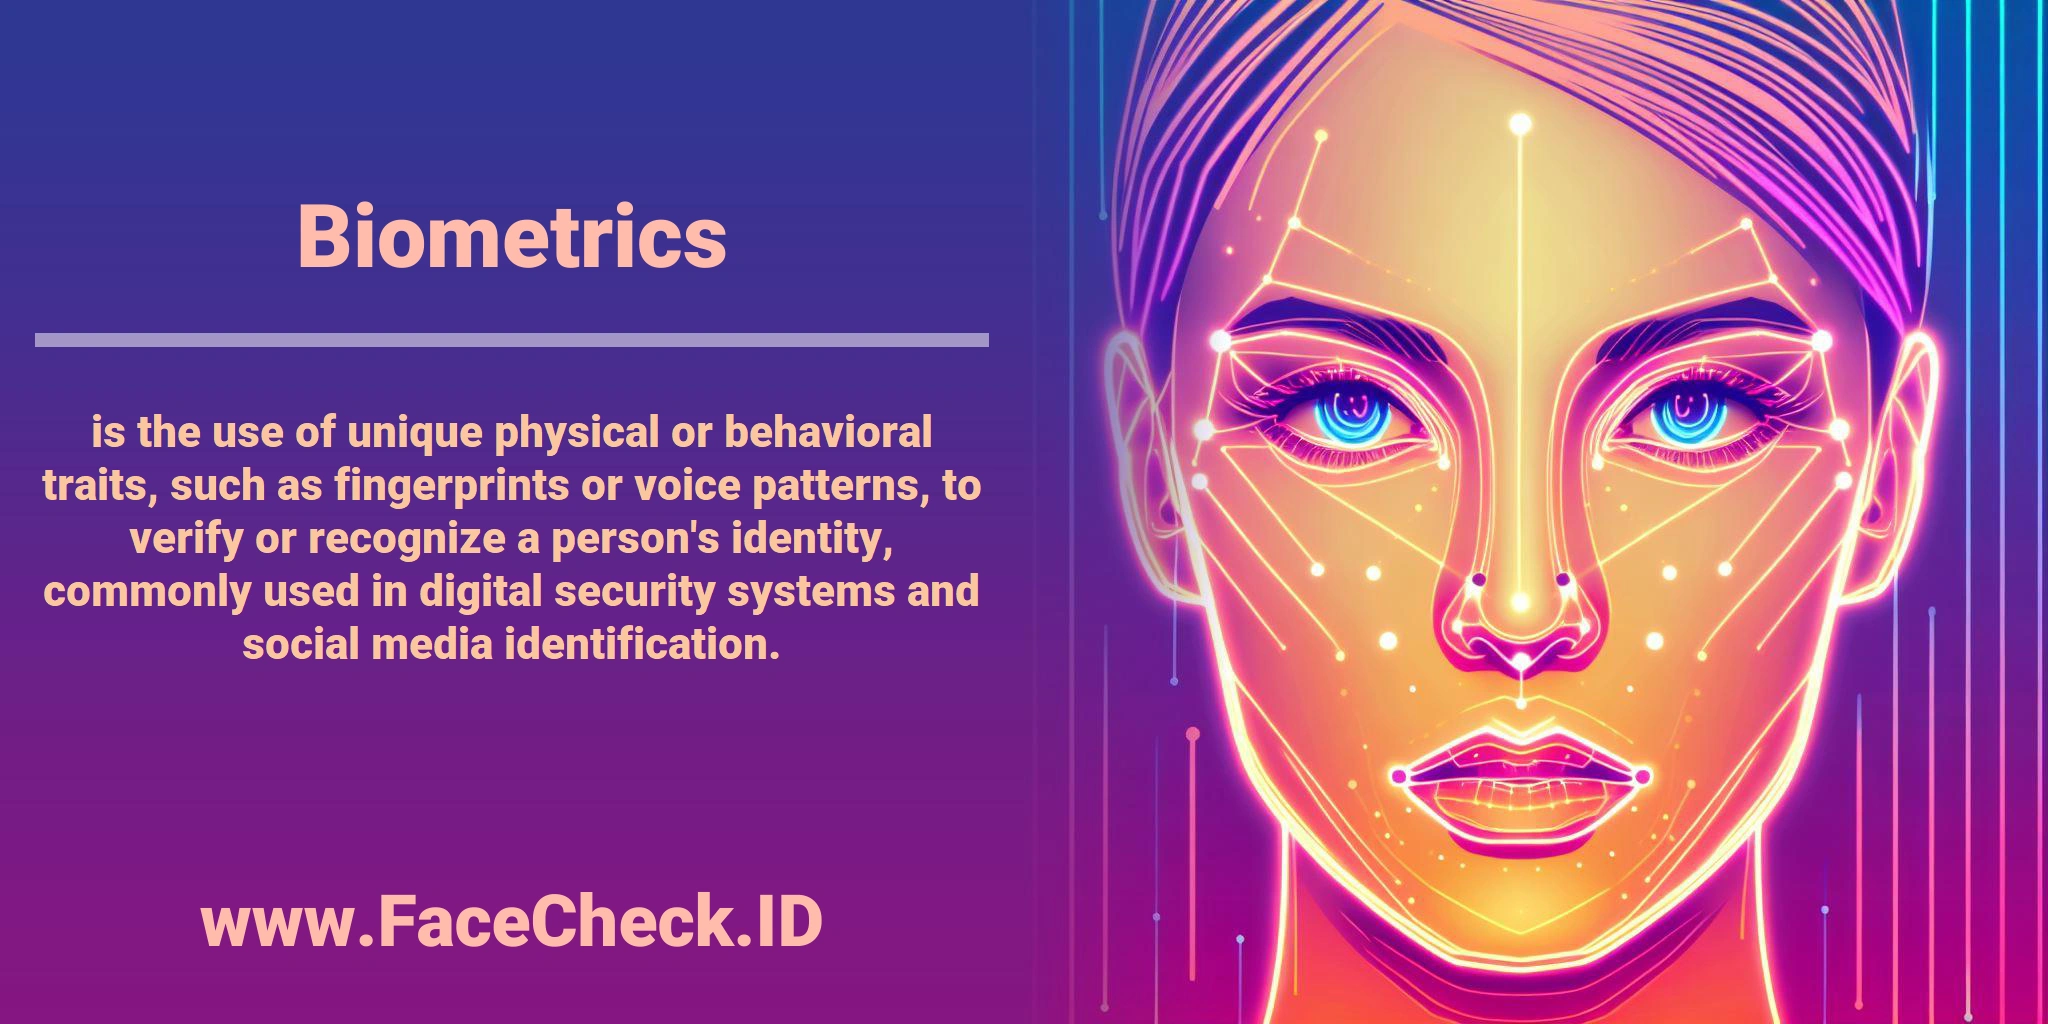 <b>Biometrics</b> is the use of unique physical or behavioral traits, such as fingerprints or voice patterns, to verify or recognize a person's identity, commonly used in digital security systems and social media identification.